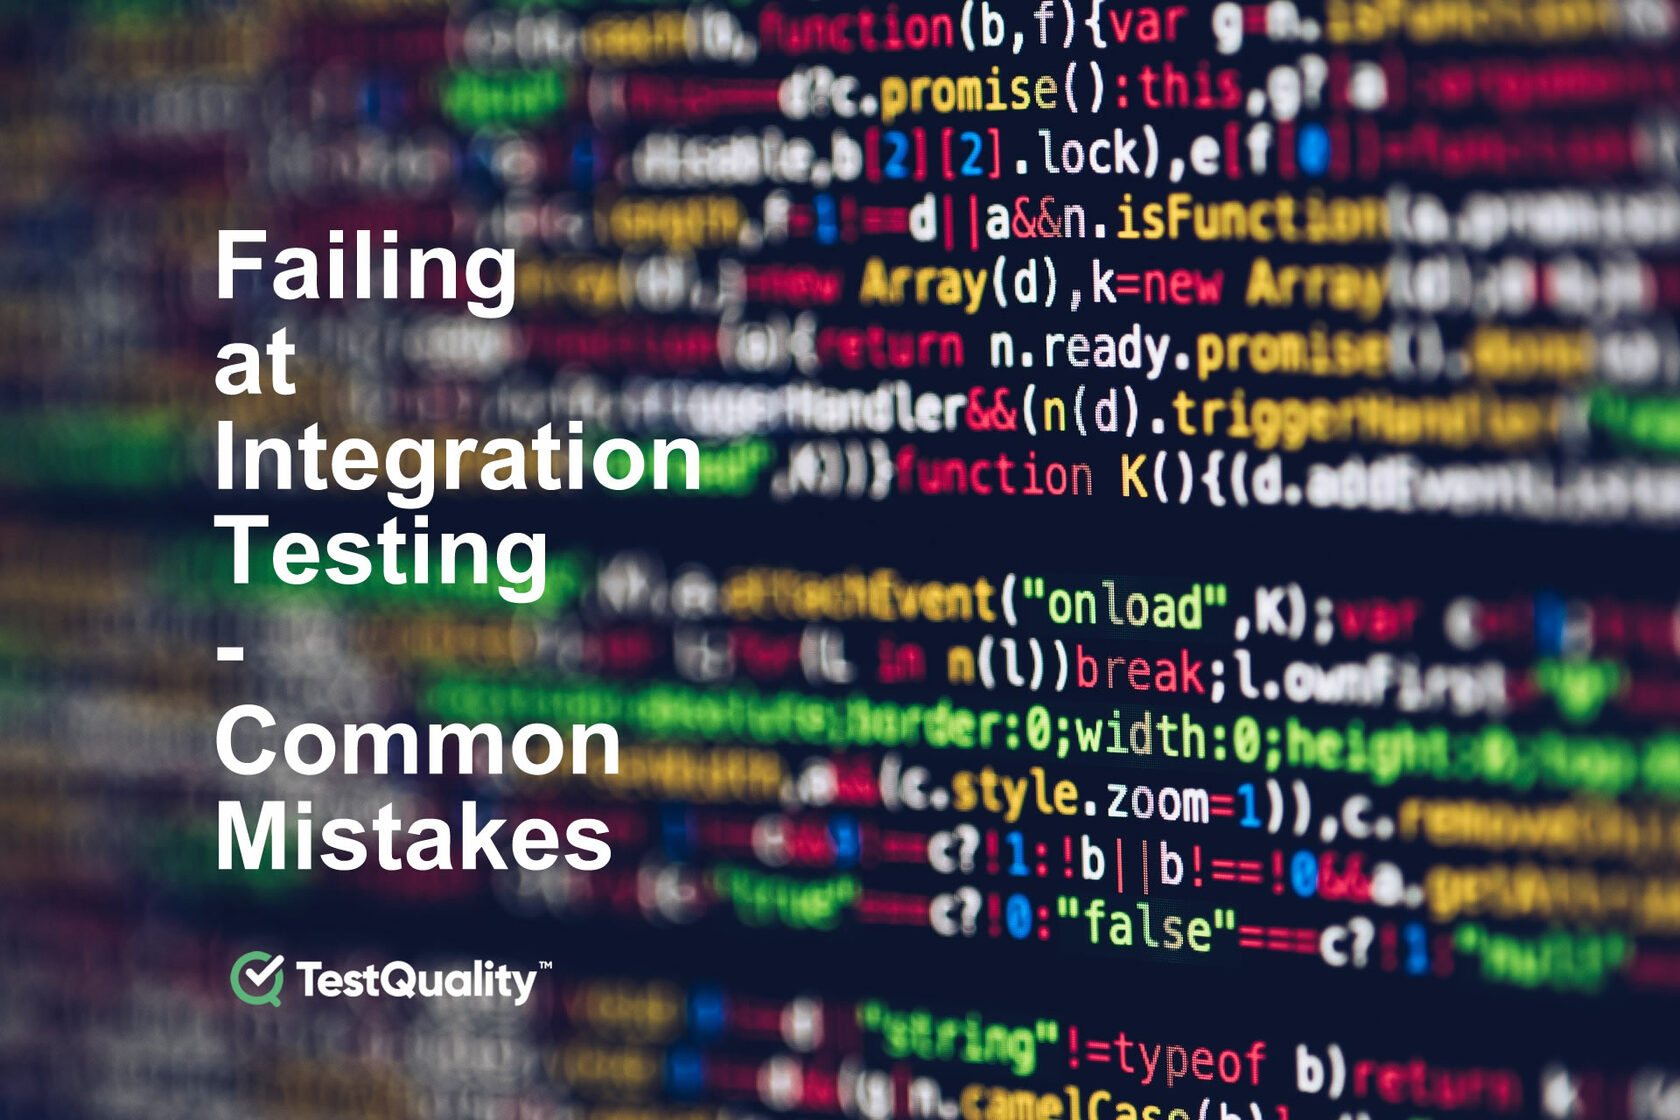 Integration Testing Pitfals and Common Mistakes | TestQuality